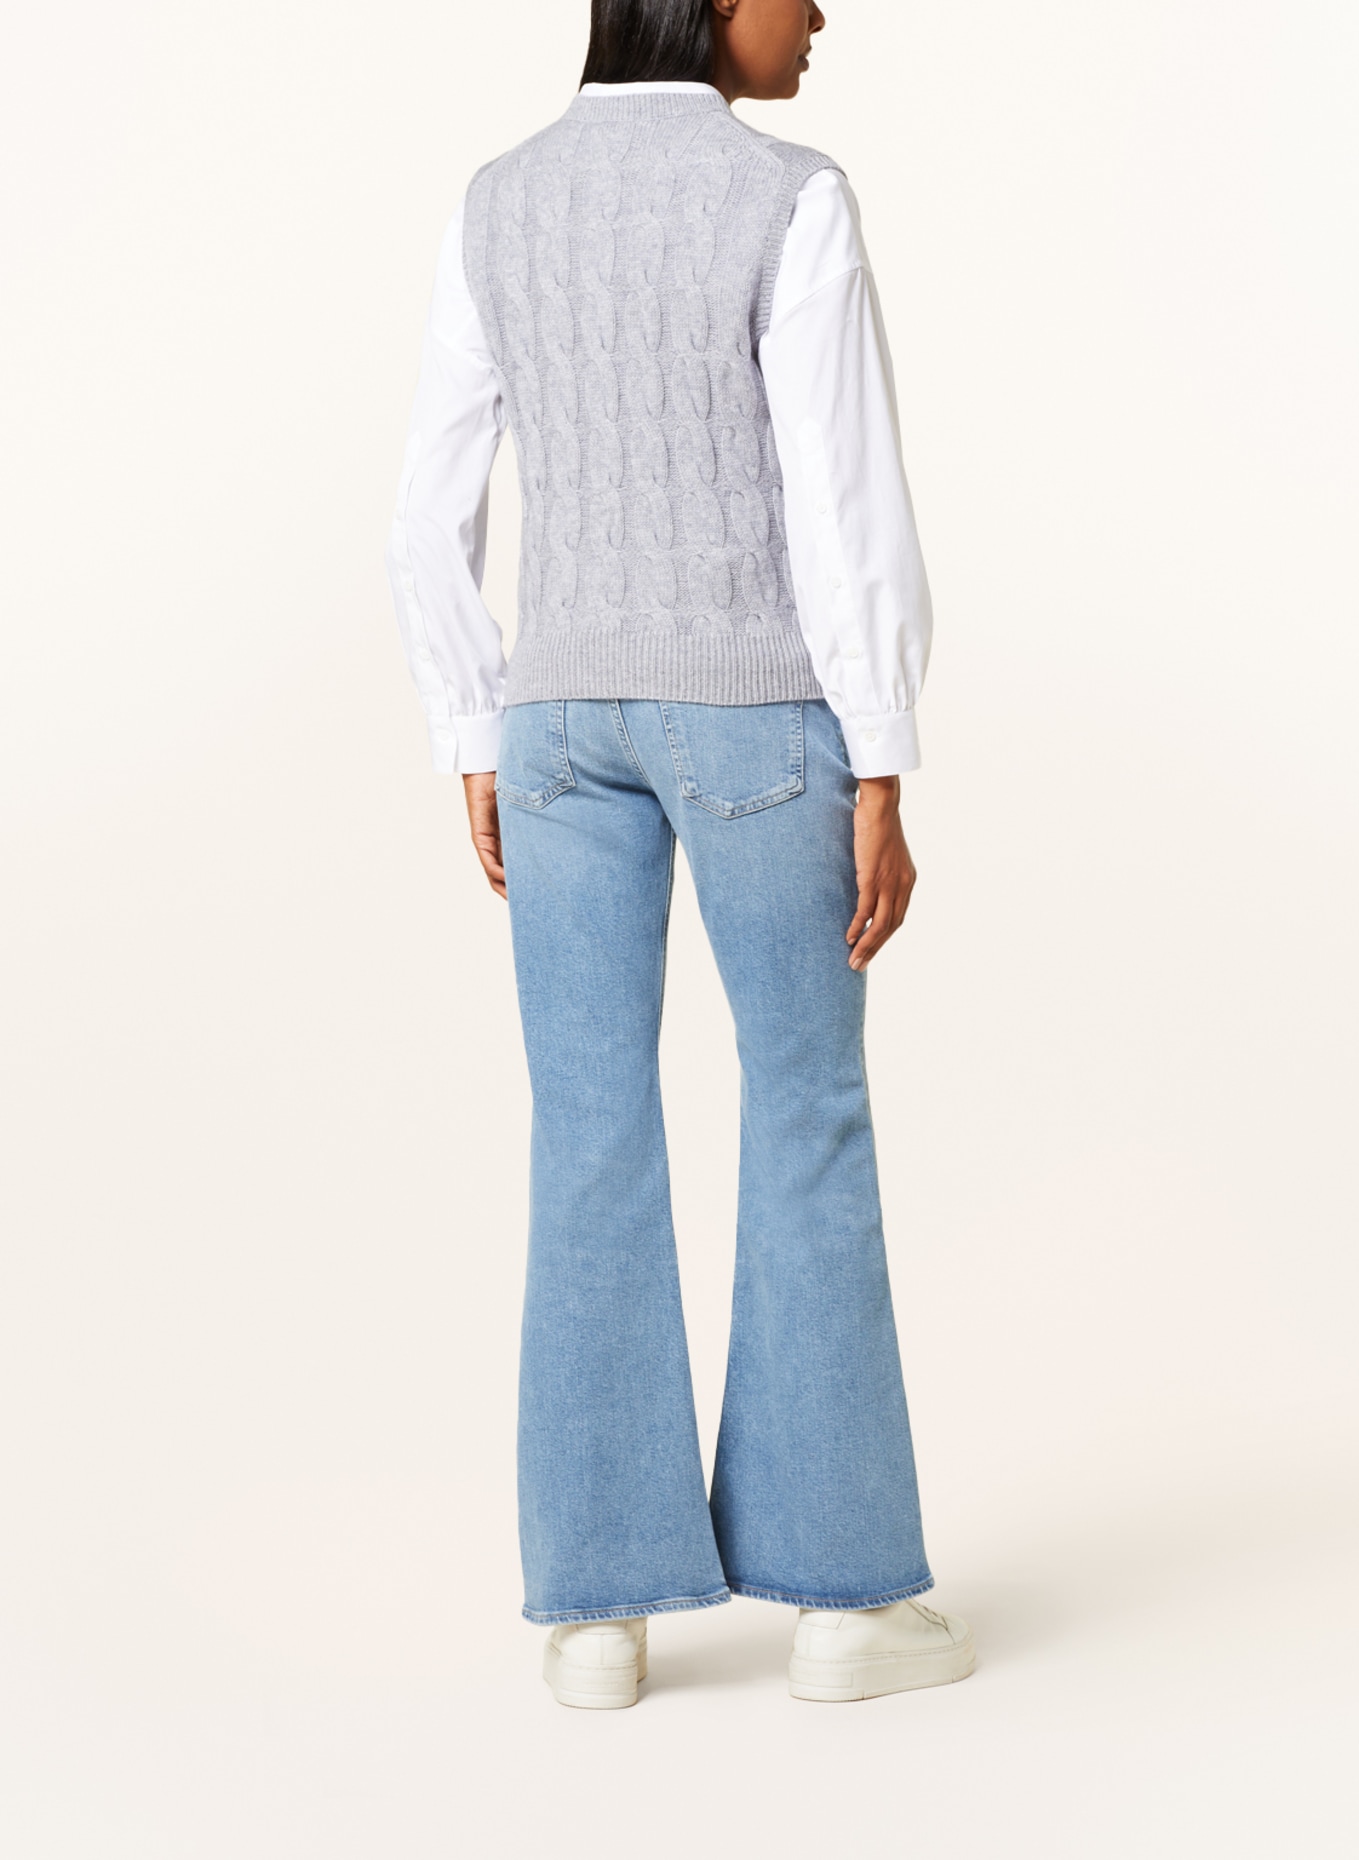 lilienfels Sweater vest with cashmere, Color: GRAY (Image 3)